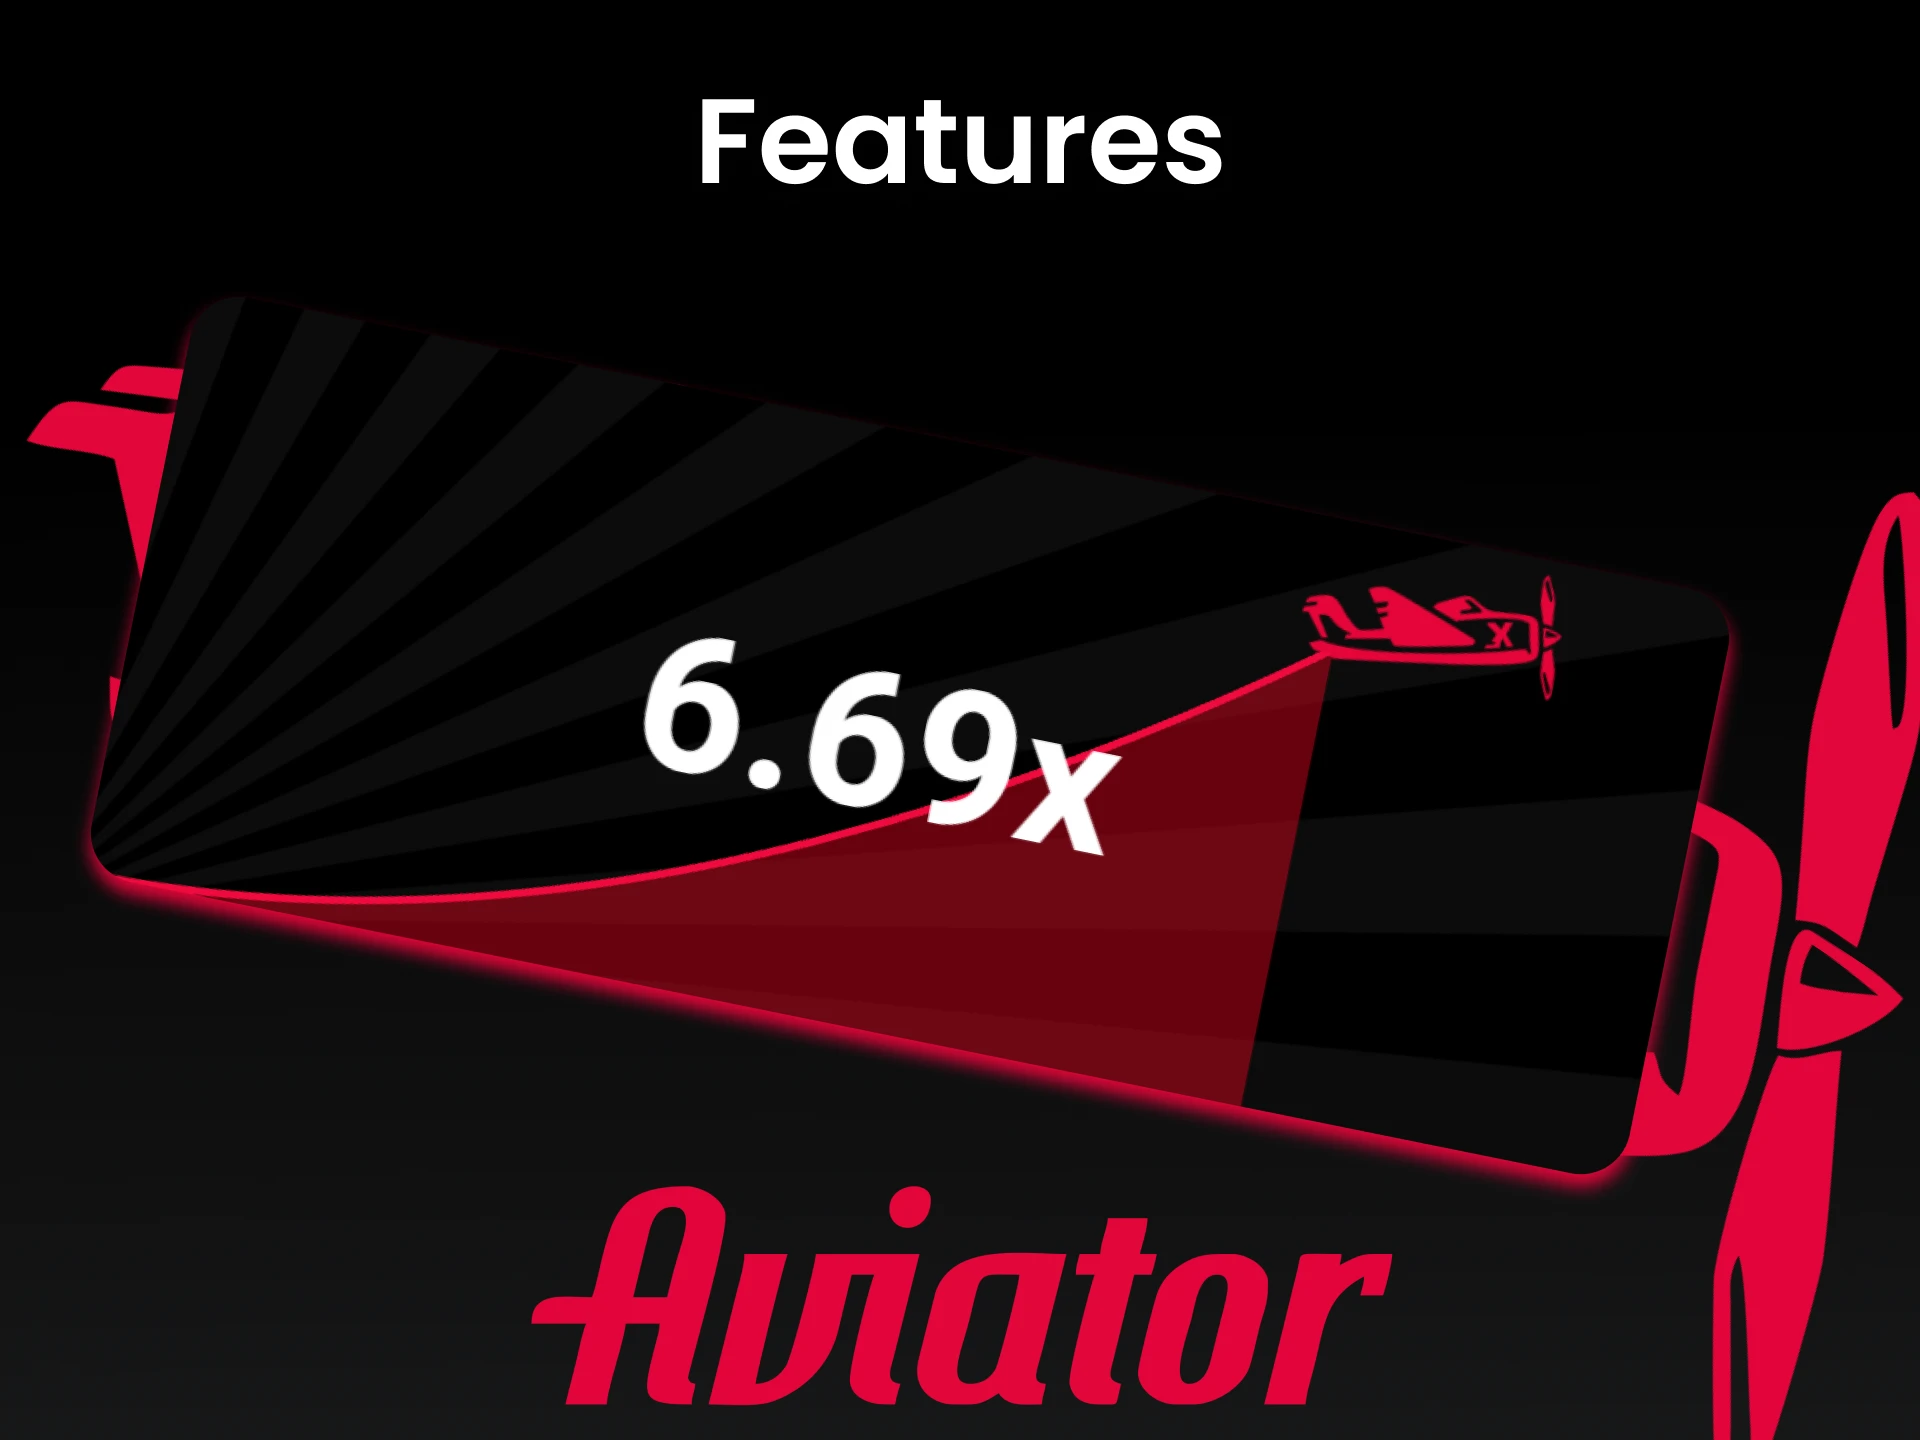 The Aviator game is constantly being improved for its users.